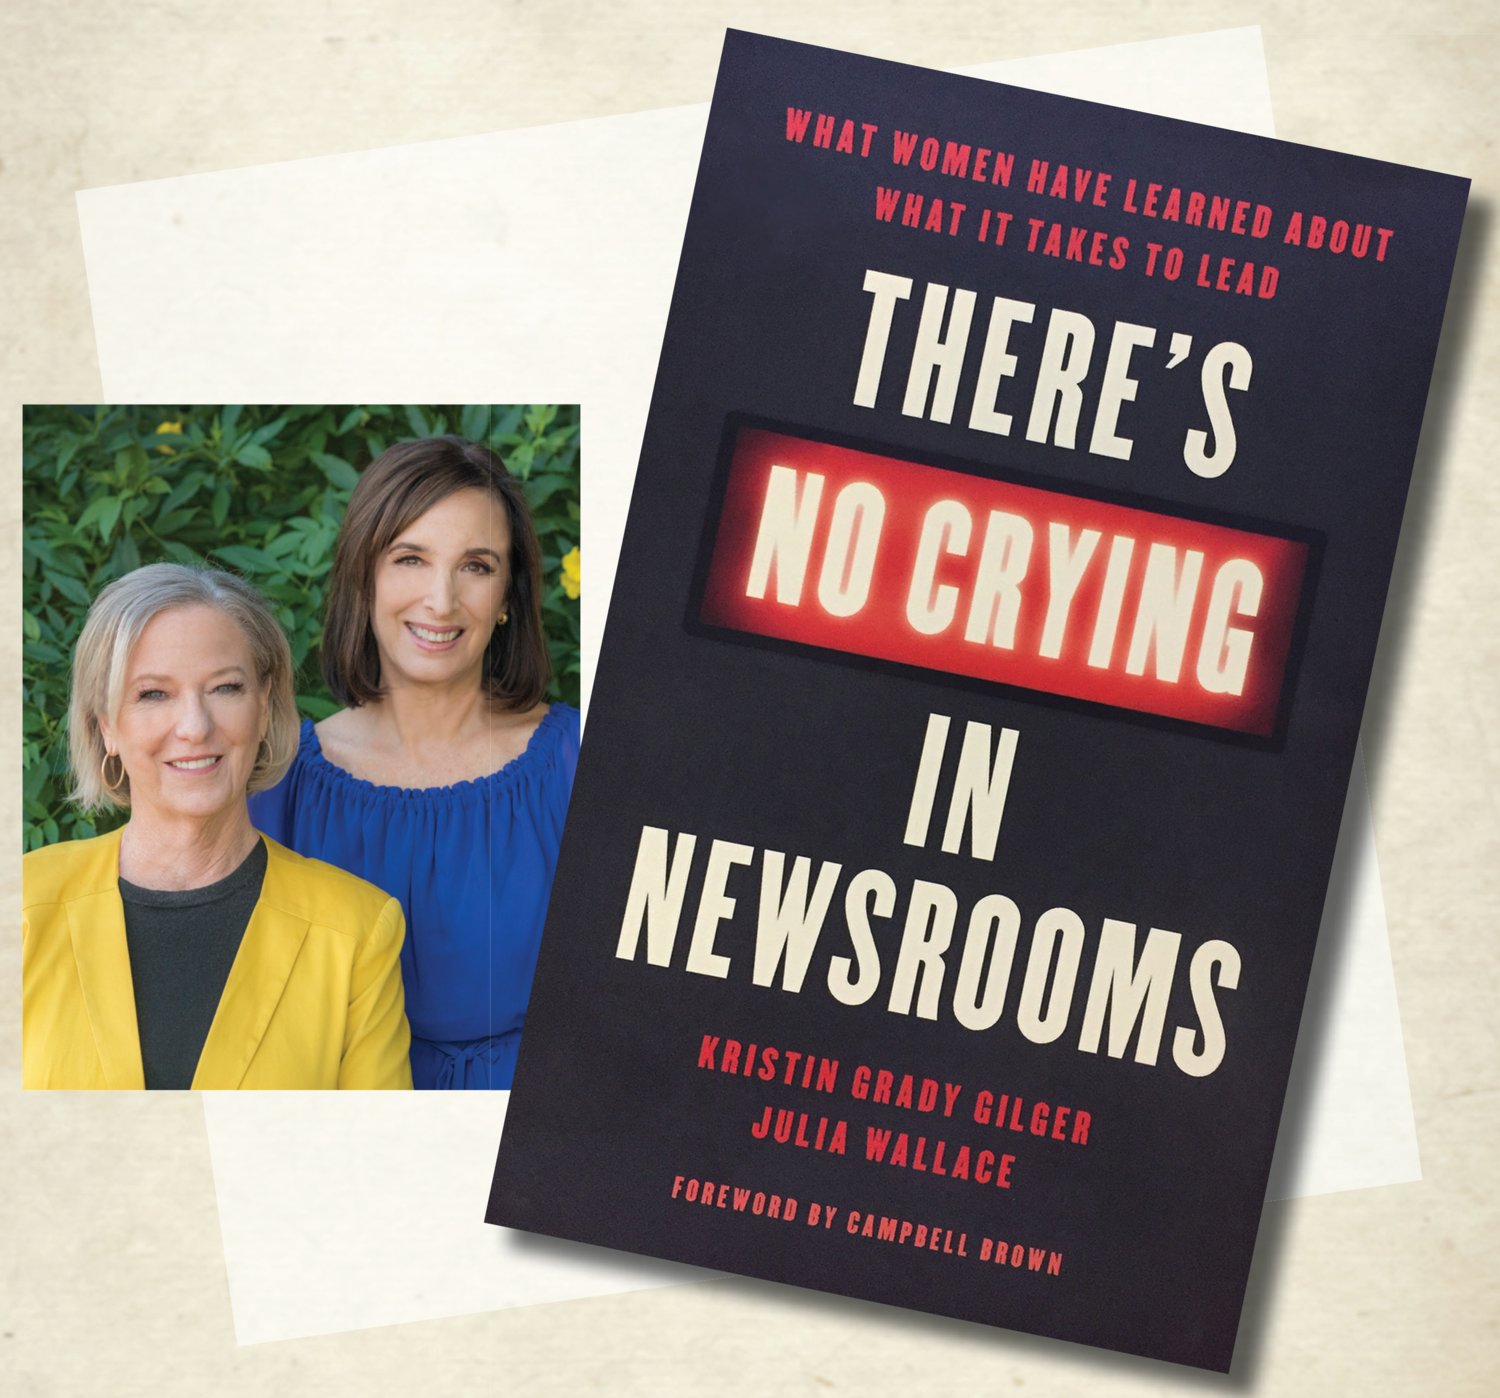 Kristin Gilger and Julia Wallace interviewed nearly 100 women about their newsroom experiences for their new book.